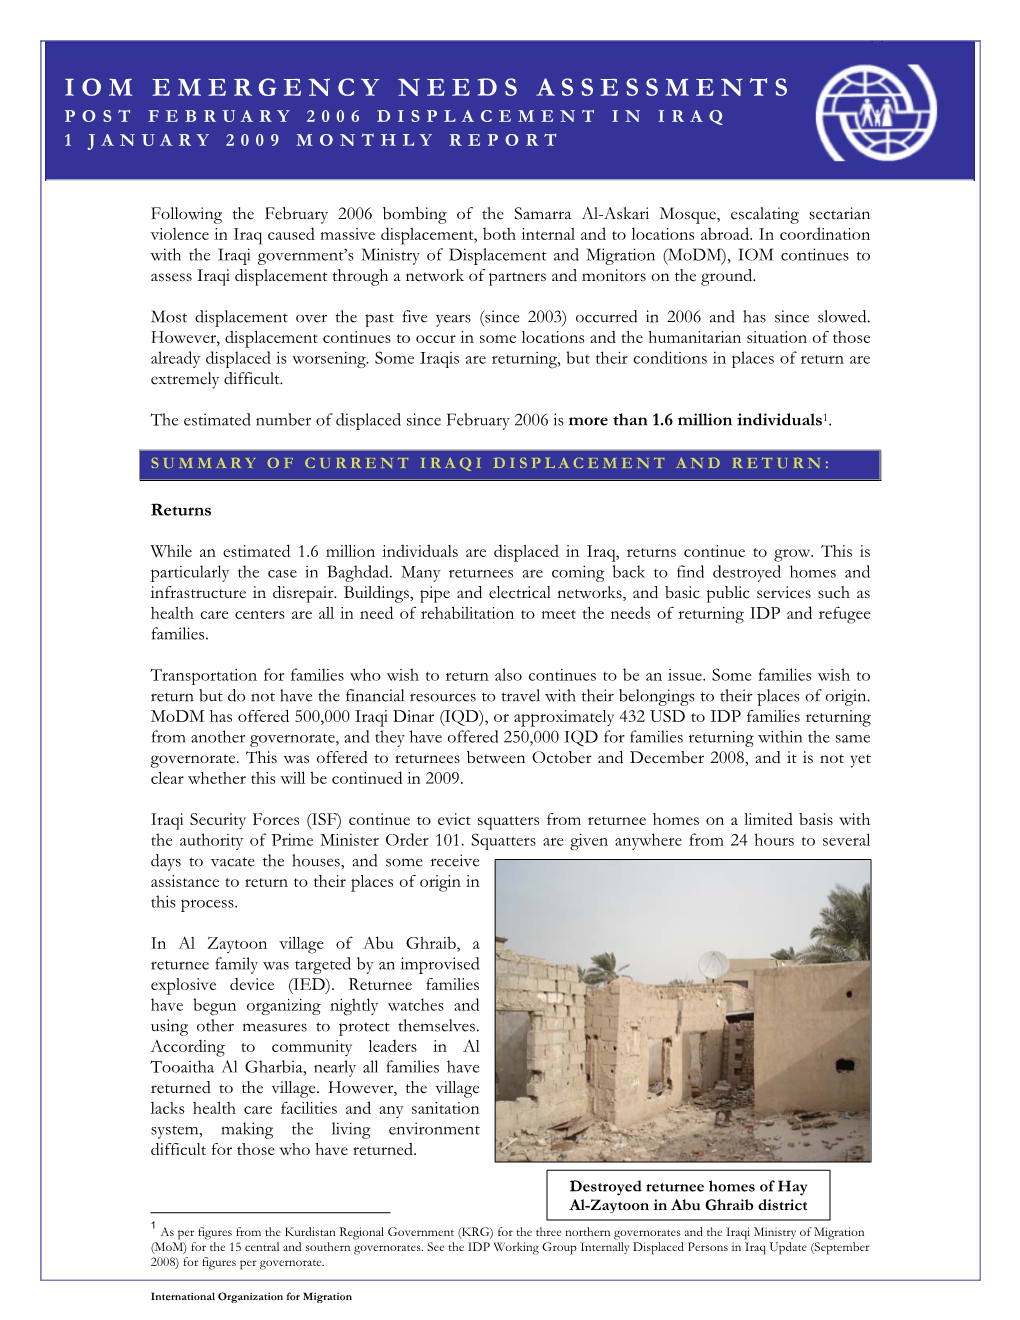 Iom Emergency Needs Assessments Post February 2006 Displacement in Iraq 1 January 2009 Monthly Report